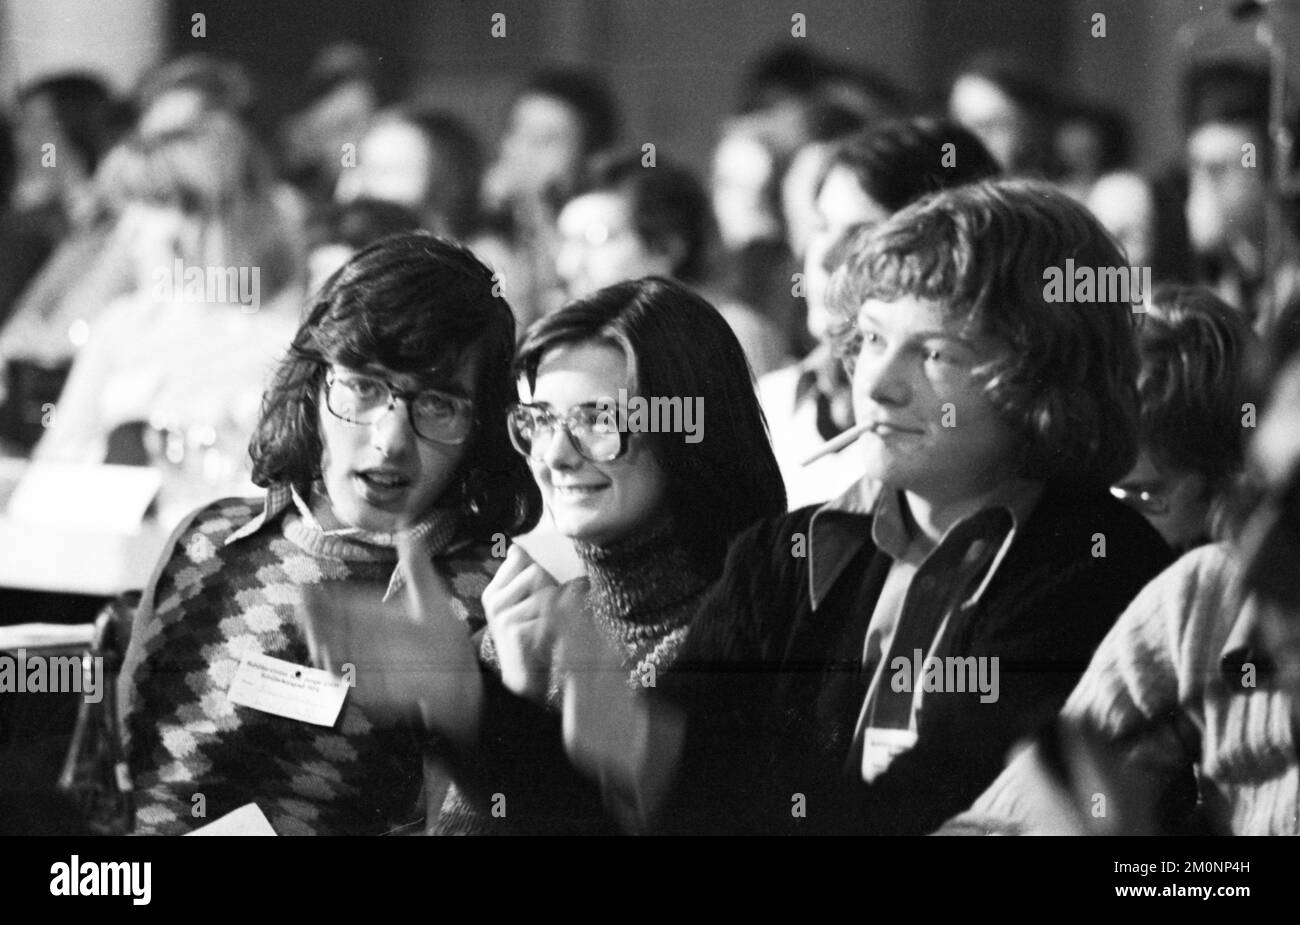 The joint school congress of the Junge Union and part of the Christian Democratic Party (CDU) in Recklinghausen, Germany, on 14 December 1974, Europe Stock Photo